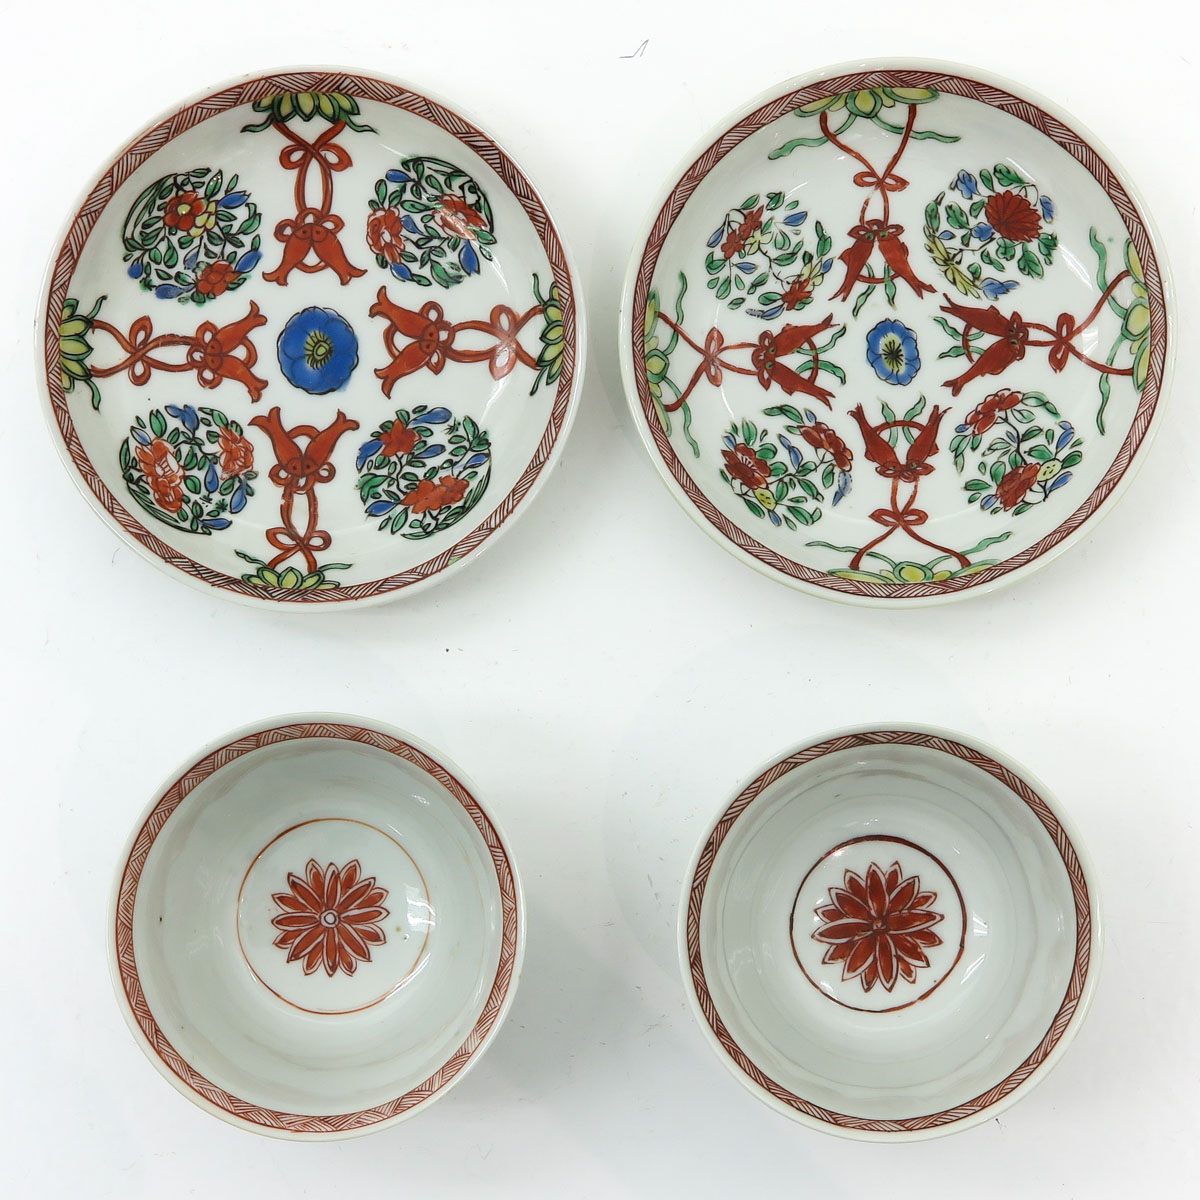 Two Chinese Cups and Saucers - Image 5 of 6